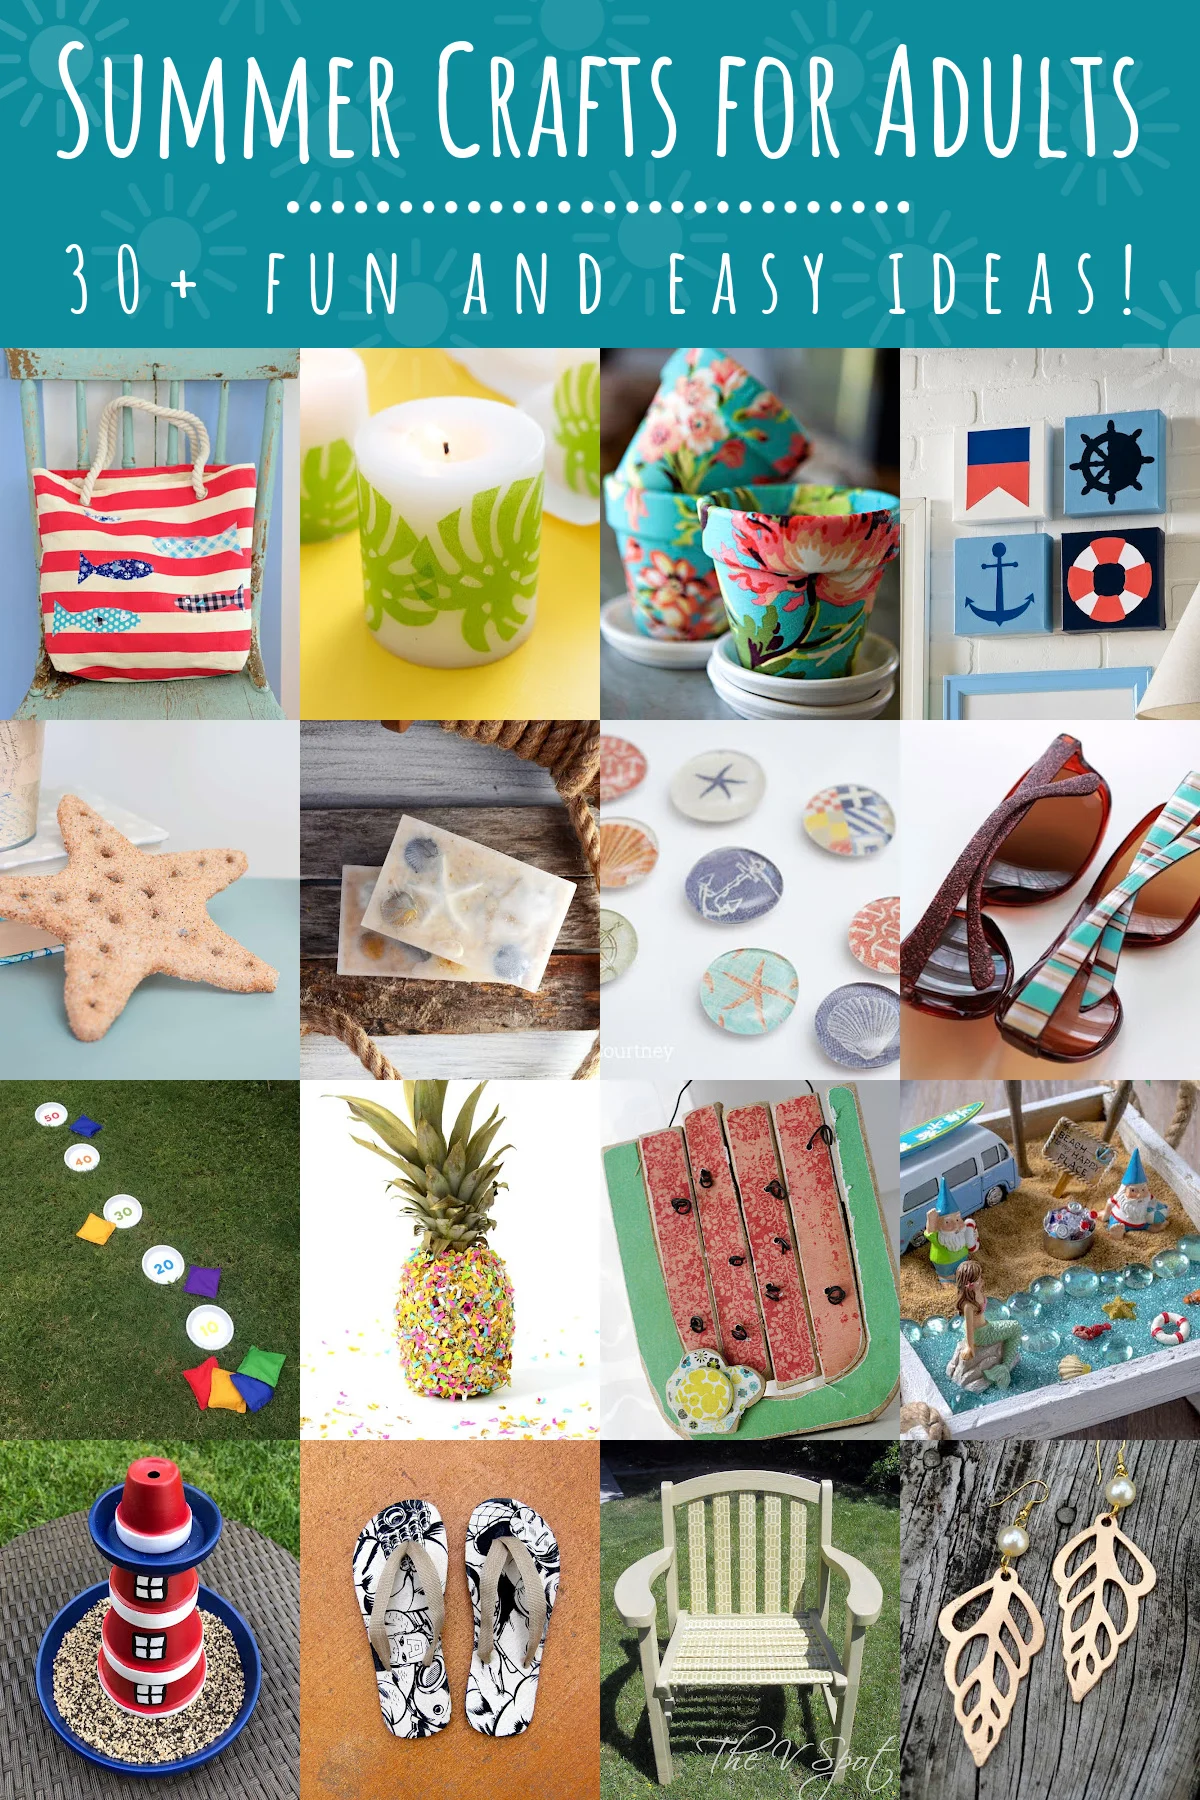 Cool Summer Crafts for Adults to Beat the Heat! - Mod Podge Rocks